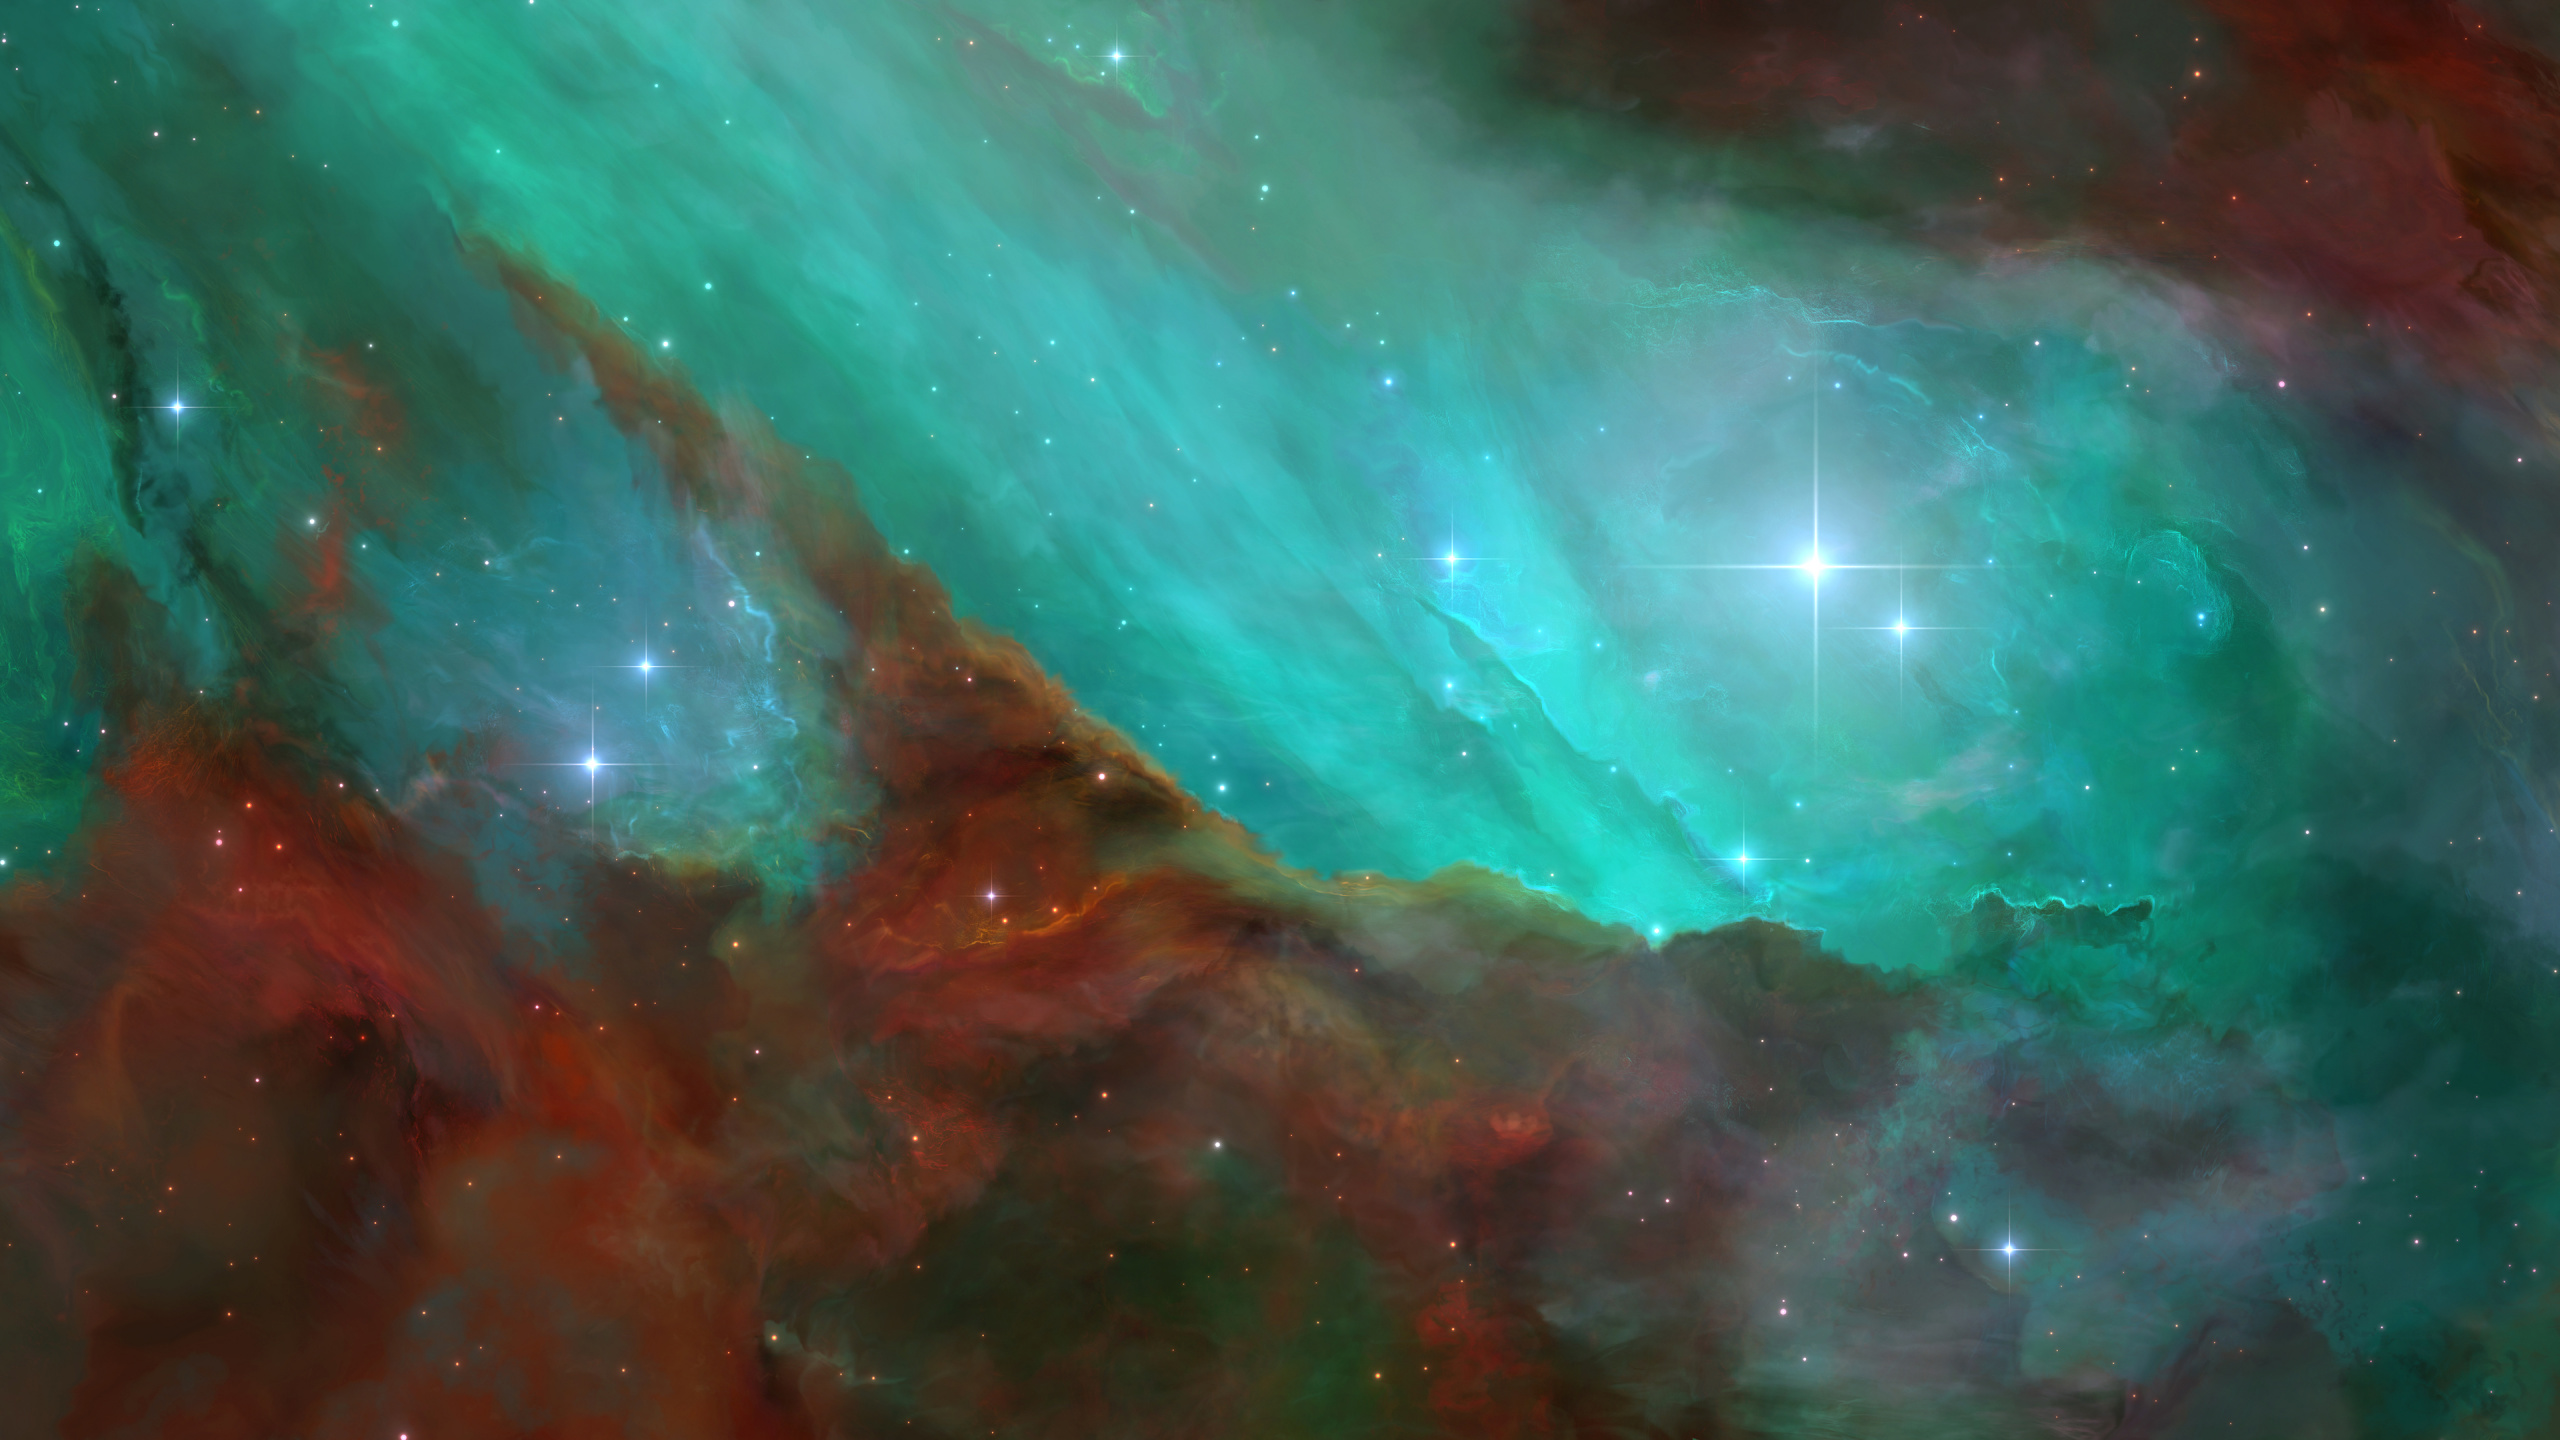 Atmosphere, Aurora, Nebula, Astronomical Object, Galaxy. Wallpaper in 2560x1440 Resolution